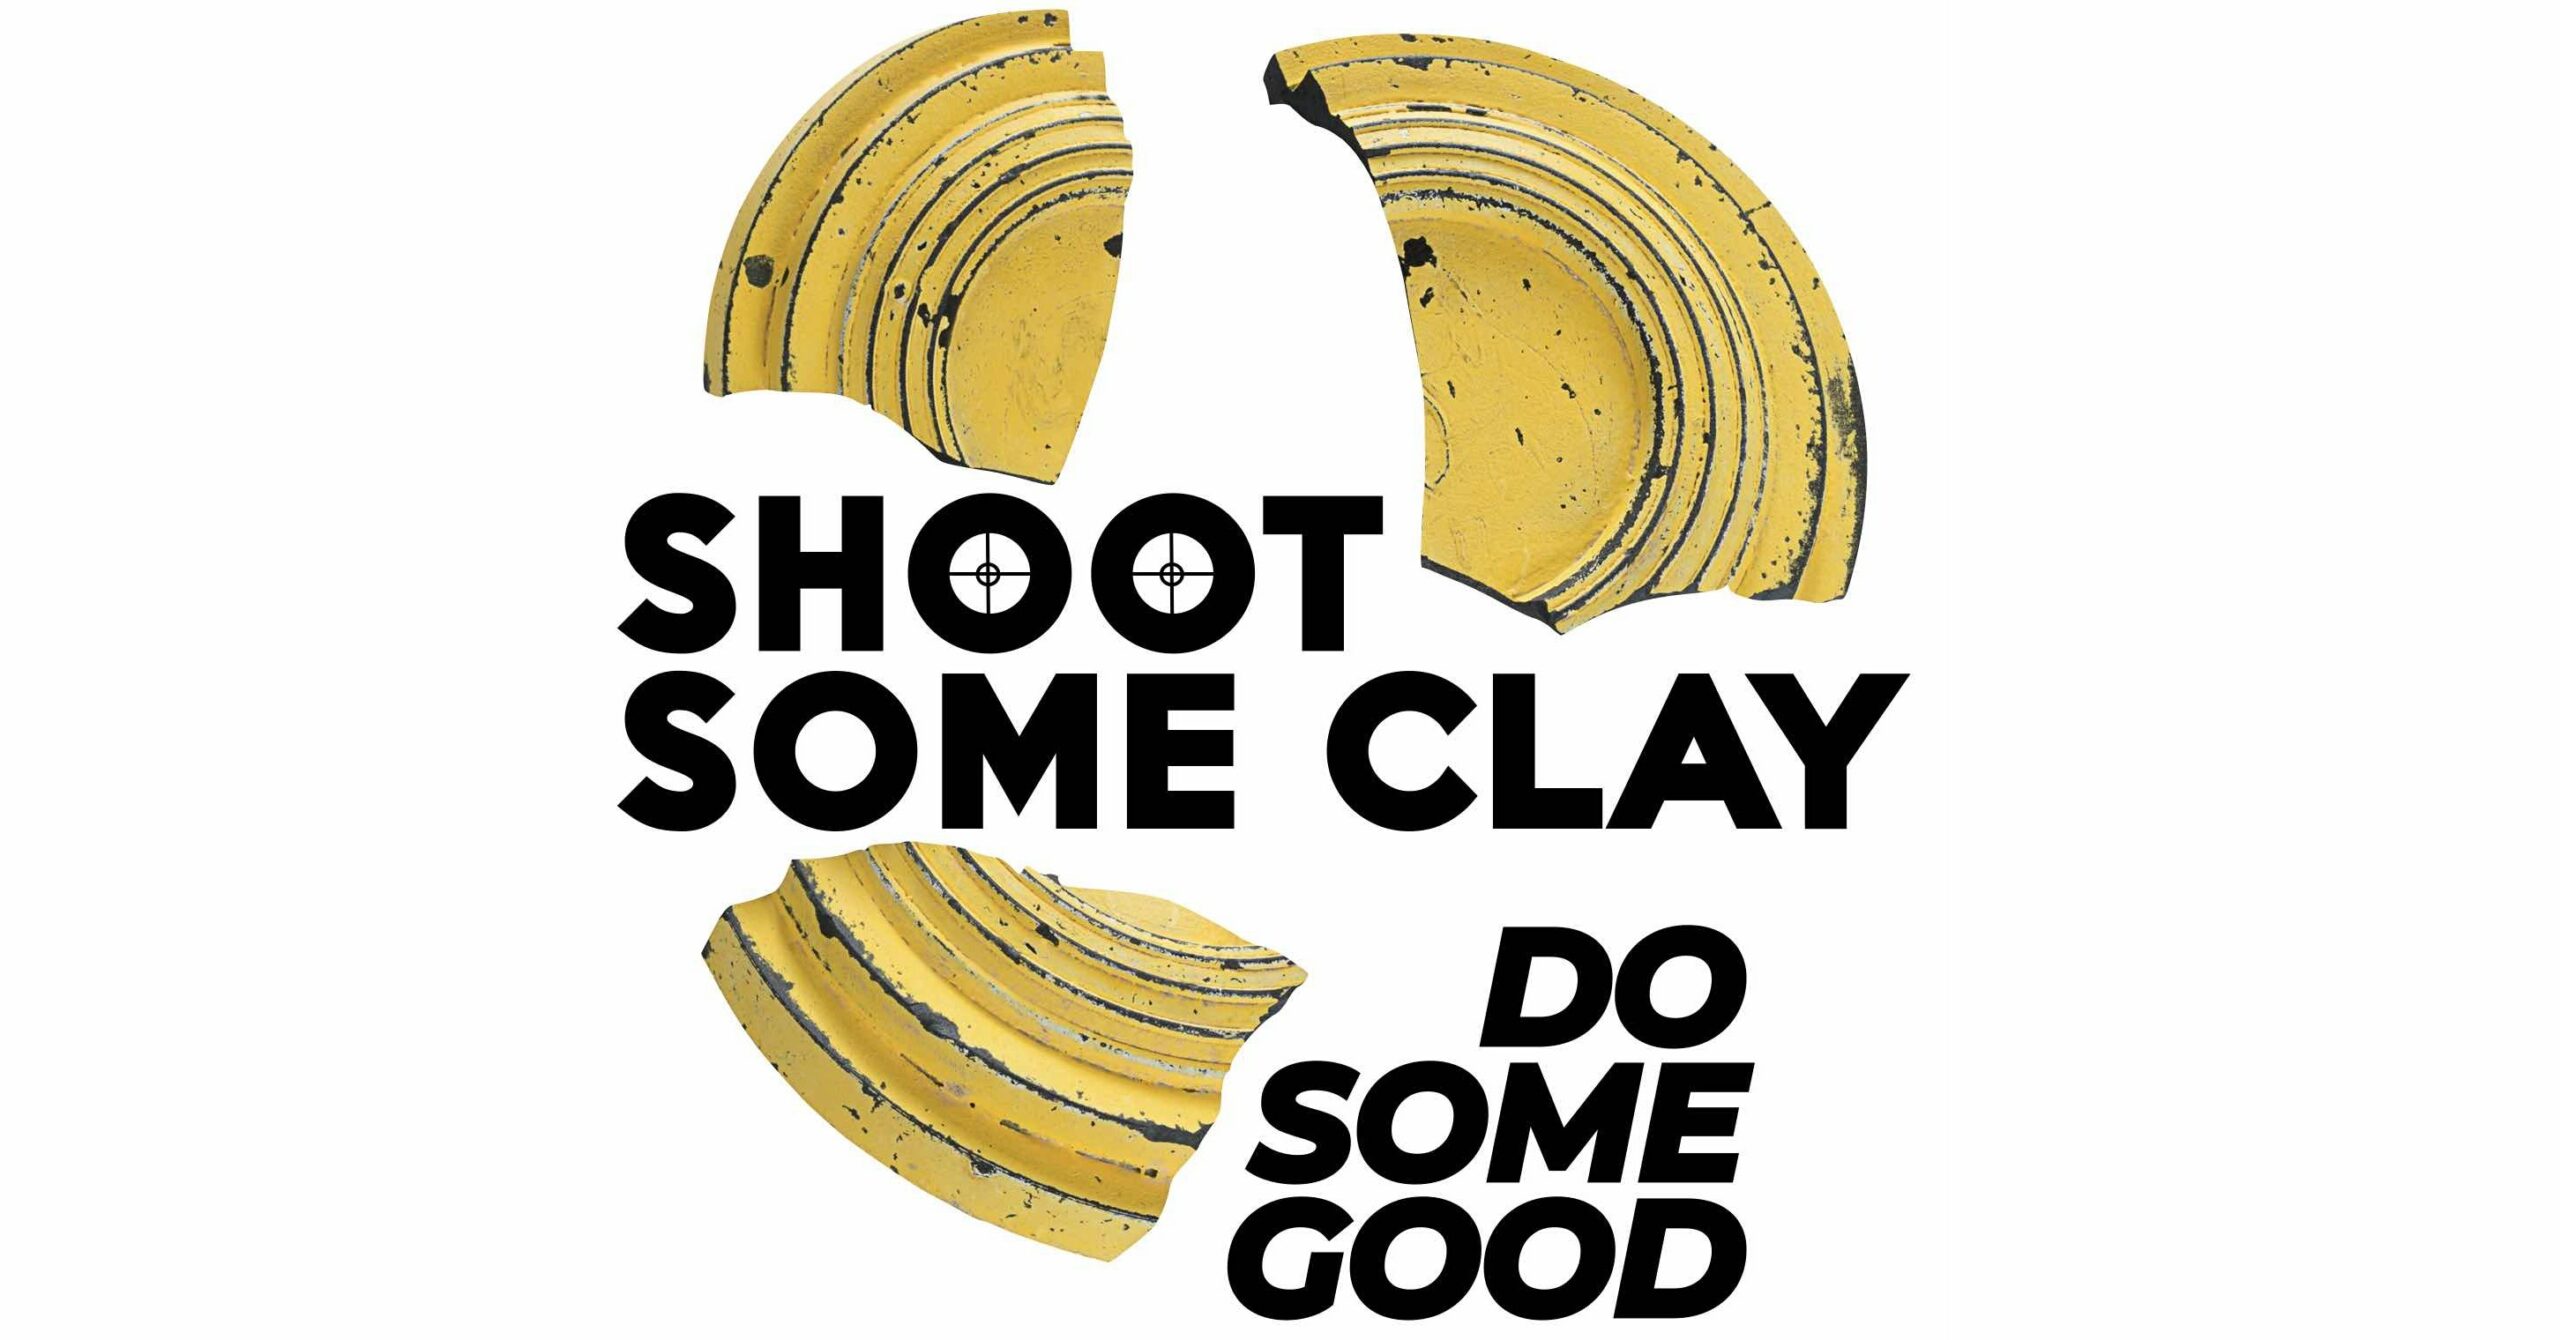 Shoot Some Clay. Do Some Good.